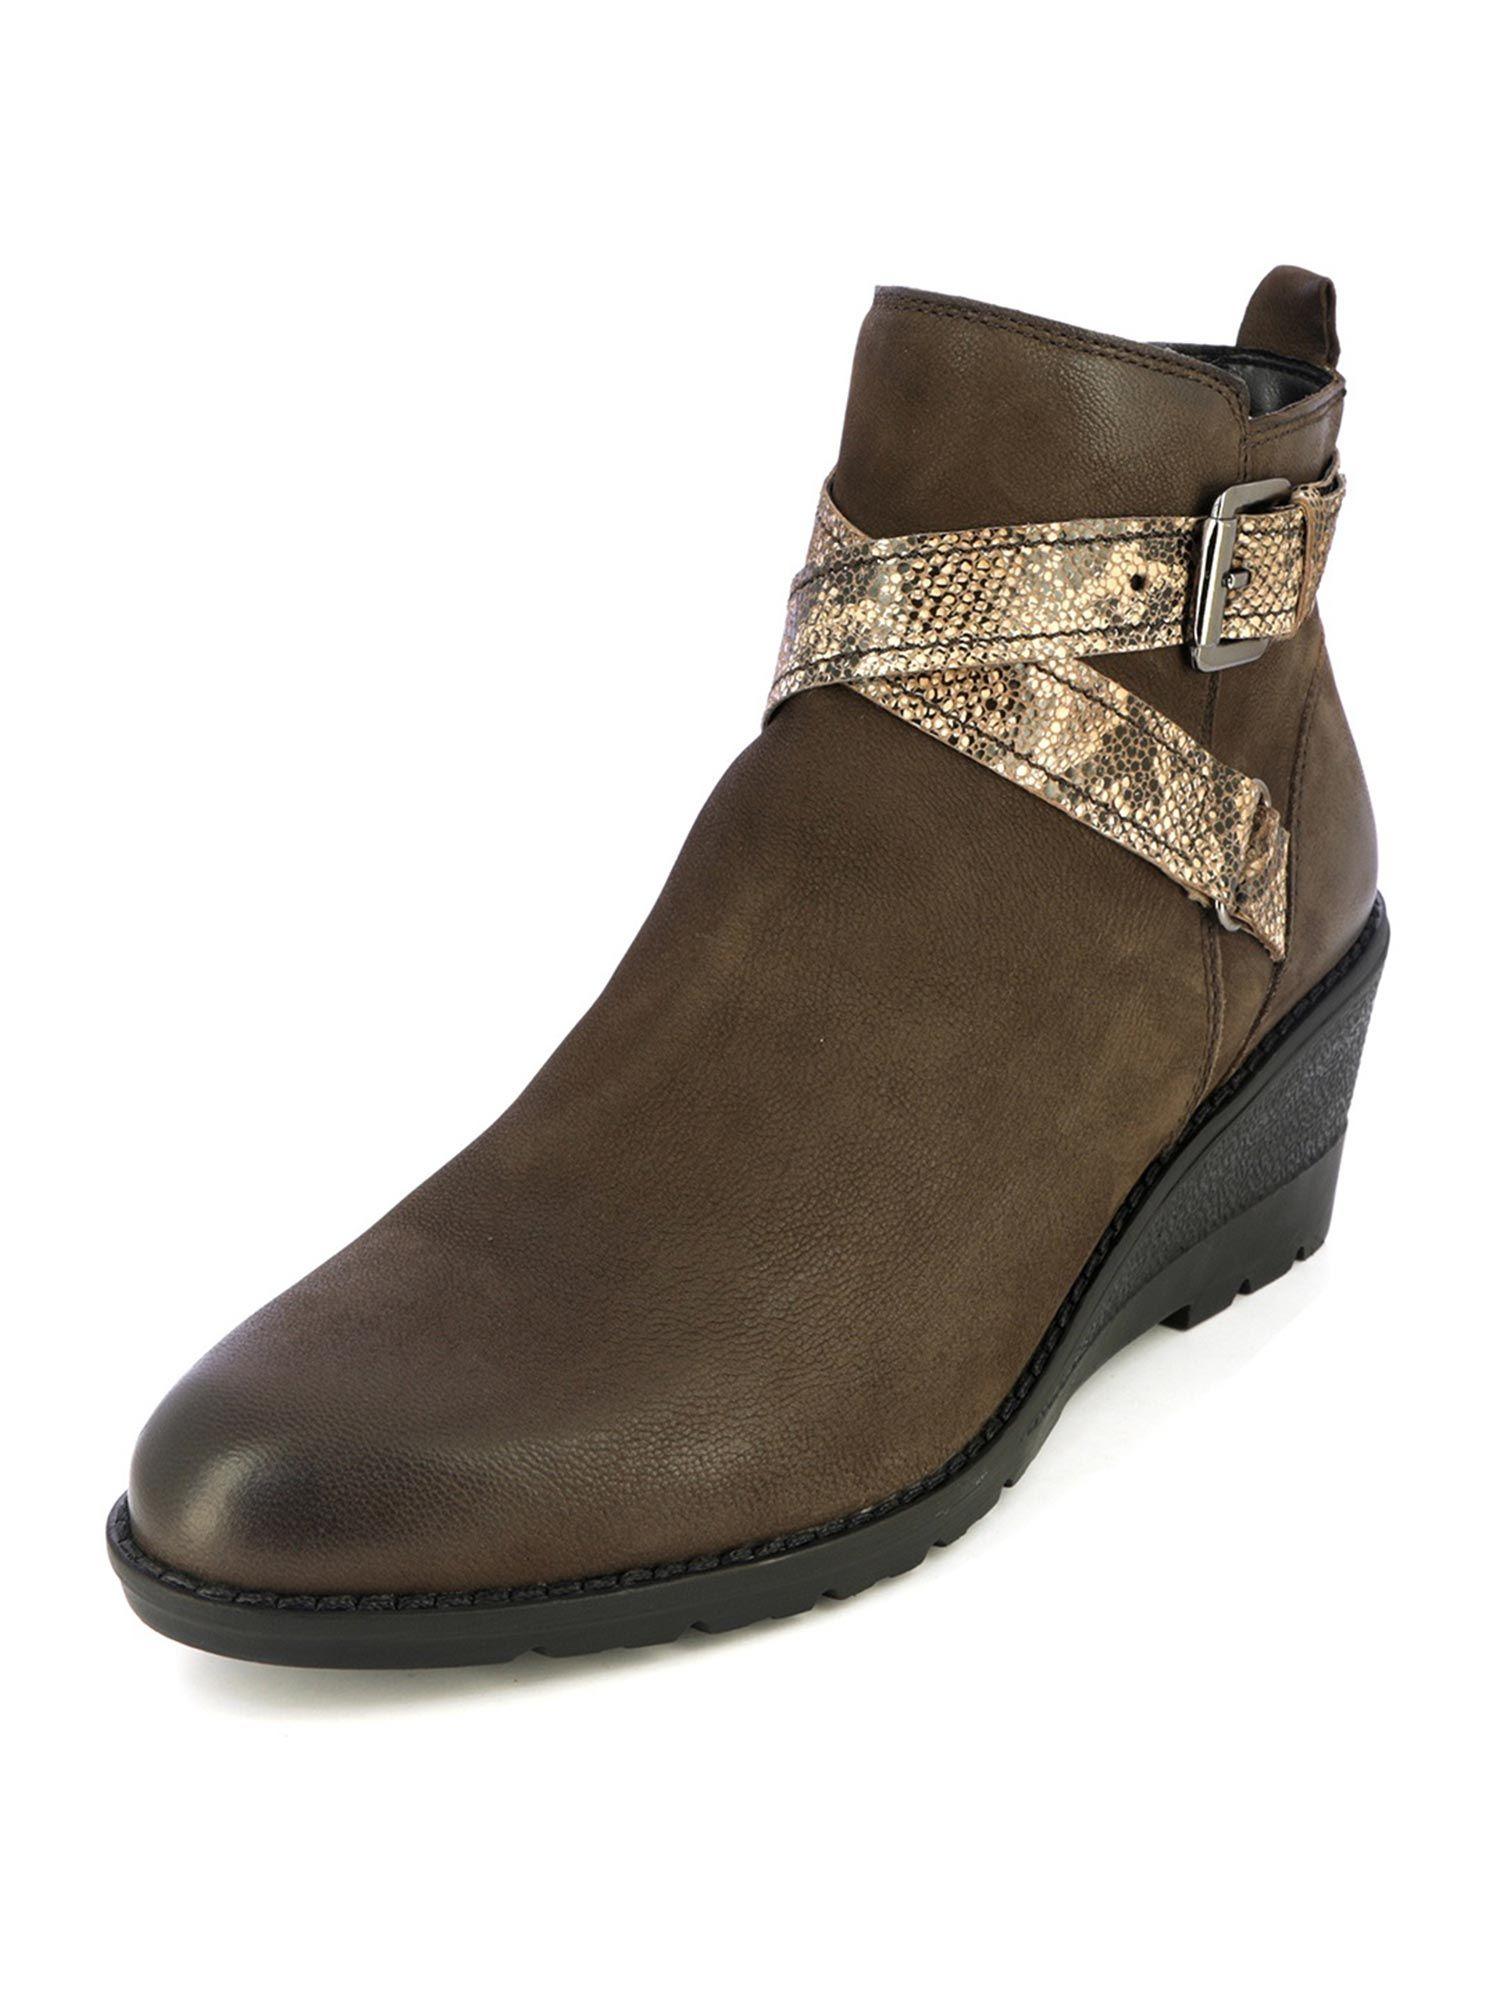 brown snake print wedge ankle boots